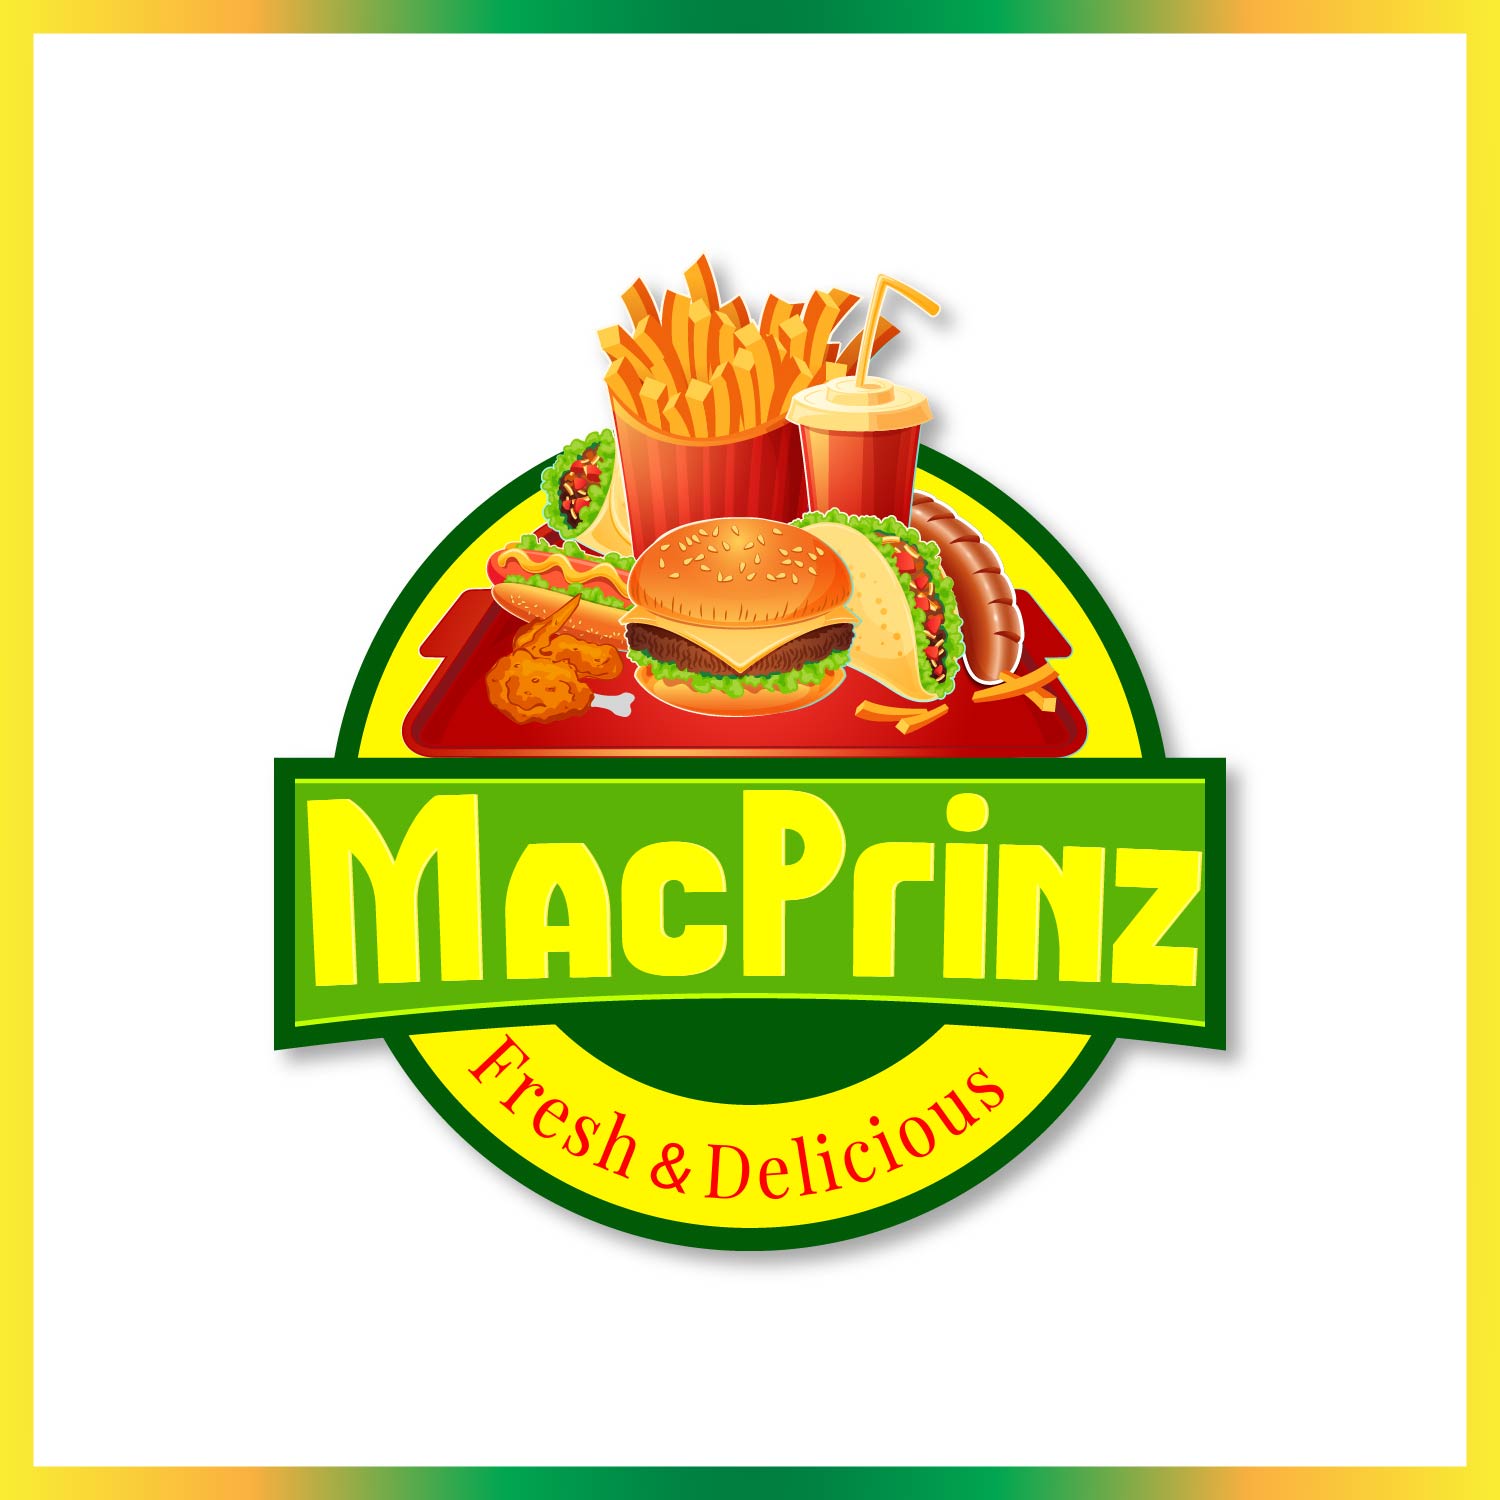 MacPrinz, Fresh and Delicious...